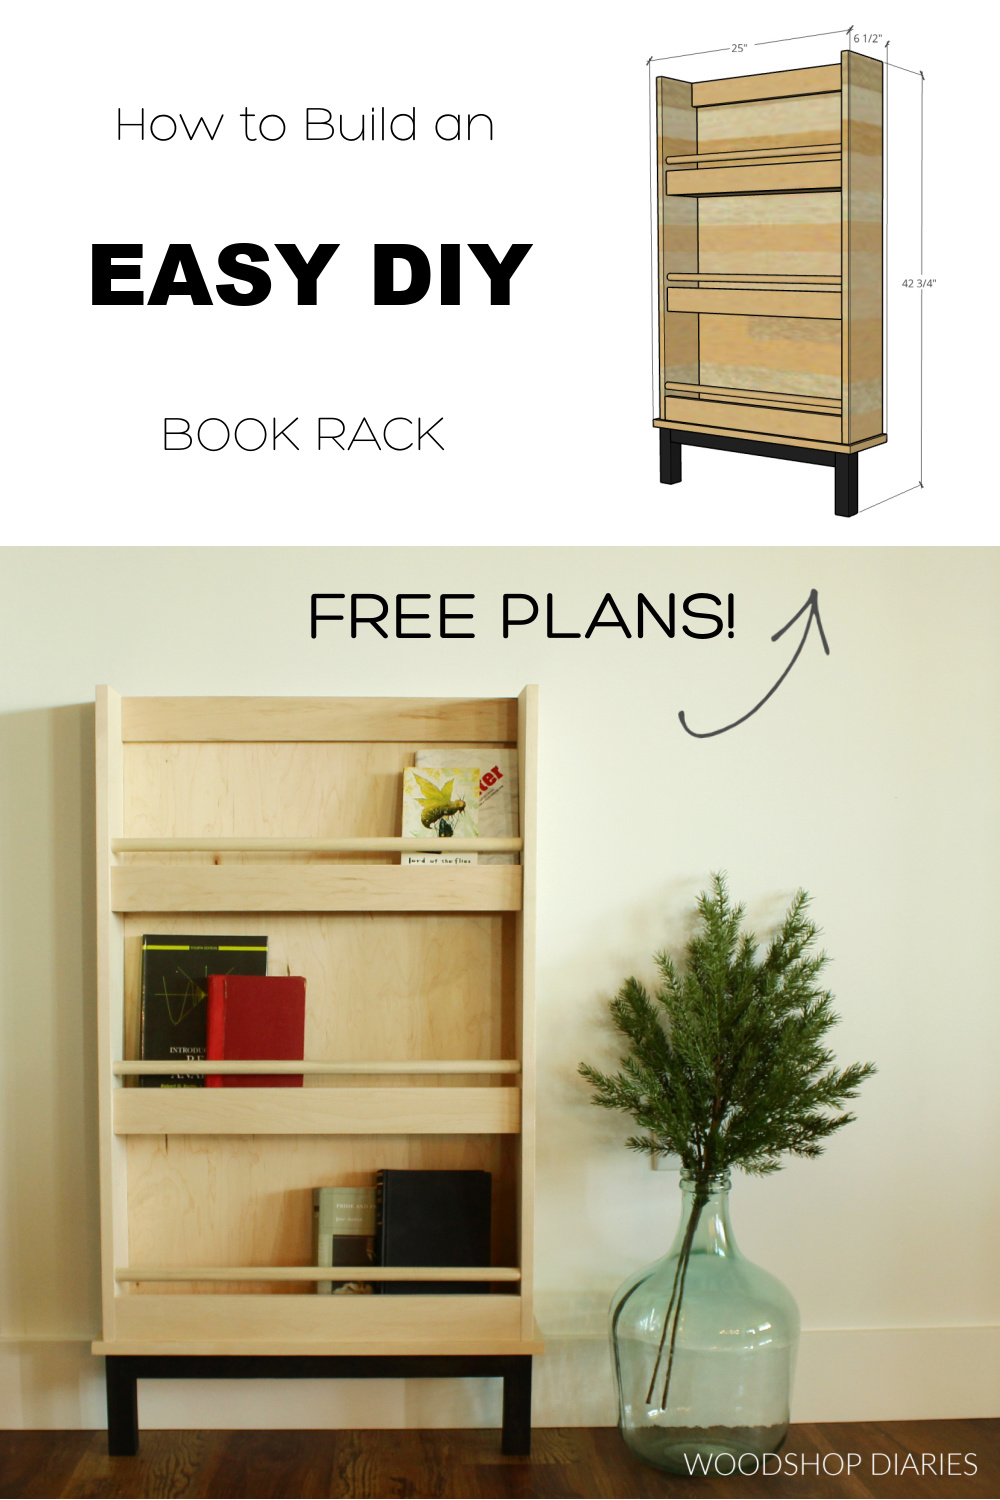 Pinterest collage image showing dimensional book rack diagram up top and completed book rack at bottom with text "how to build an easy DIY book rack free plans"